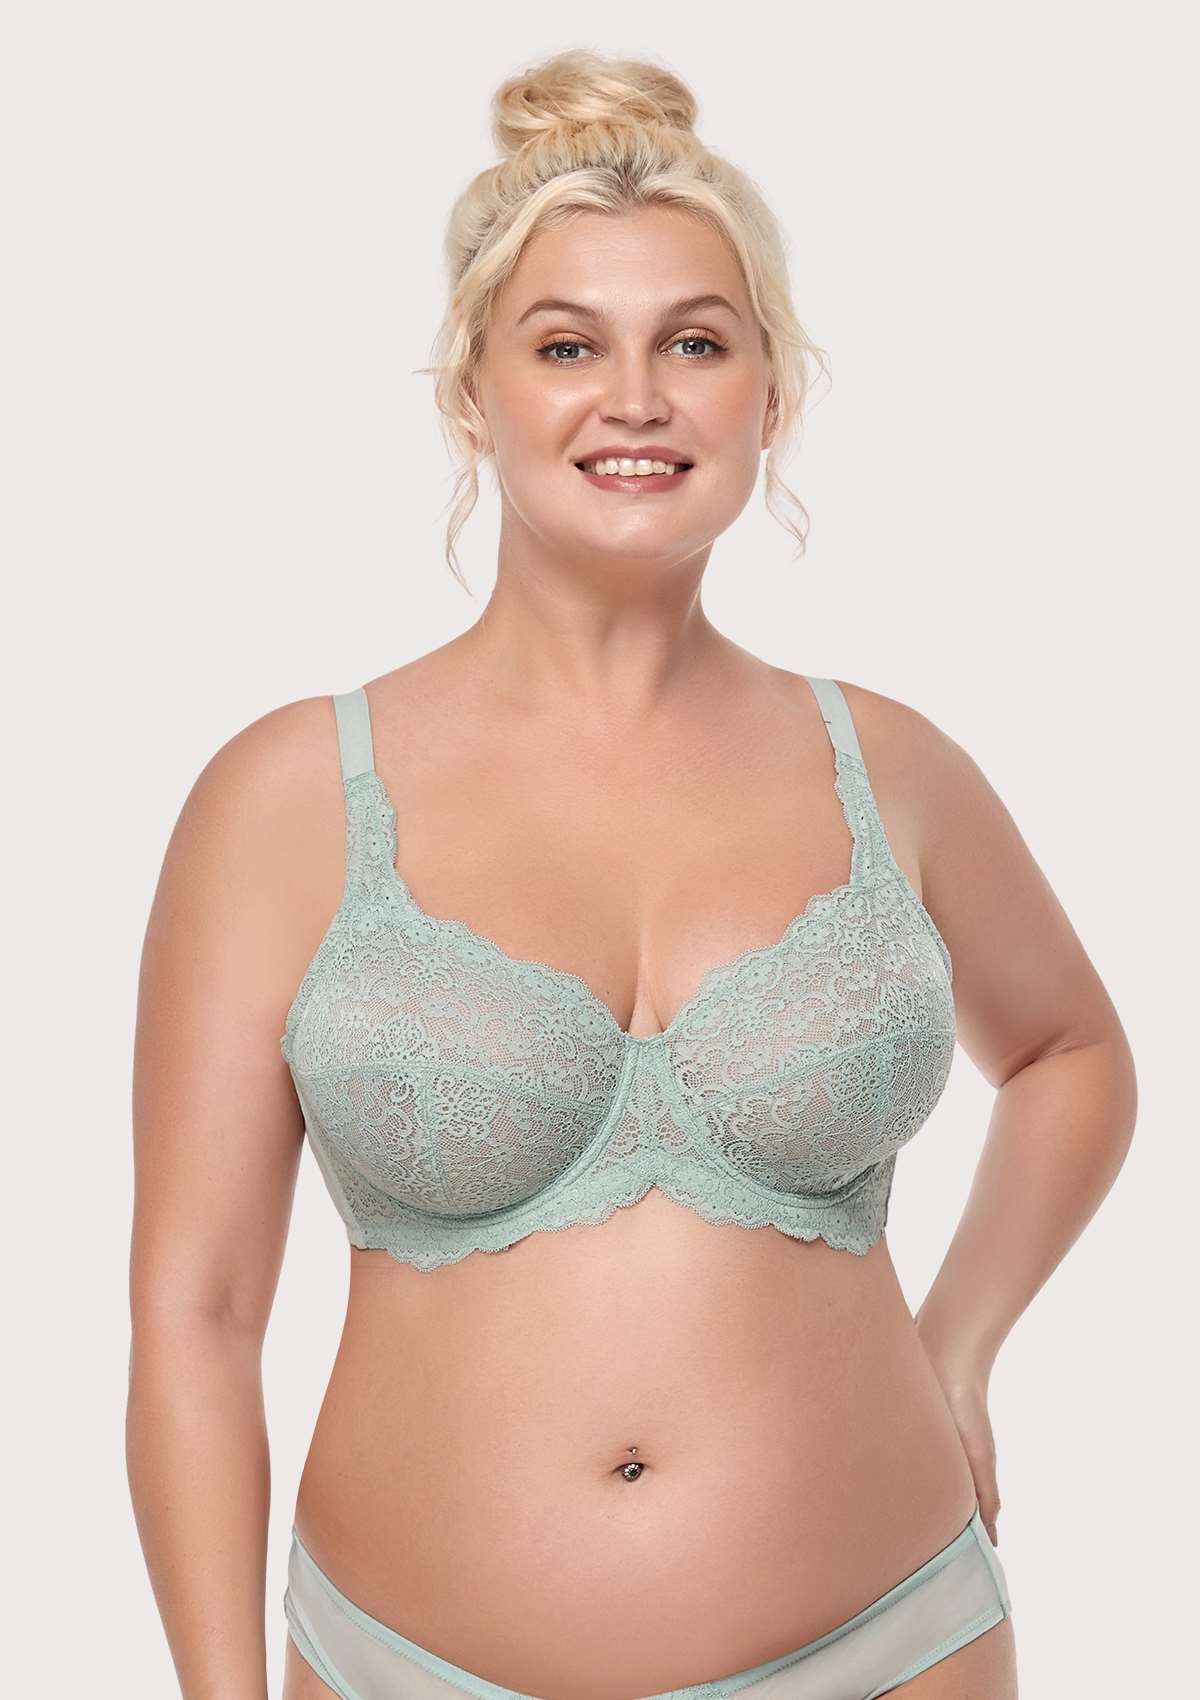 HSIA All-Over Floral Lace: Best Bra For Elderly With Sagging Breasts - Crystal Blue / 42 / DD/E